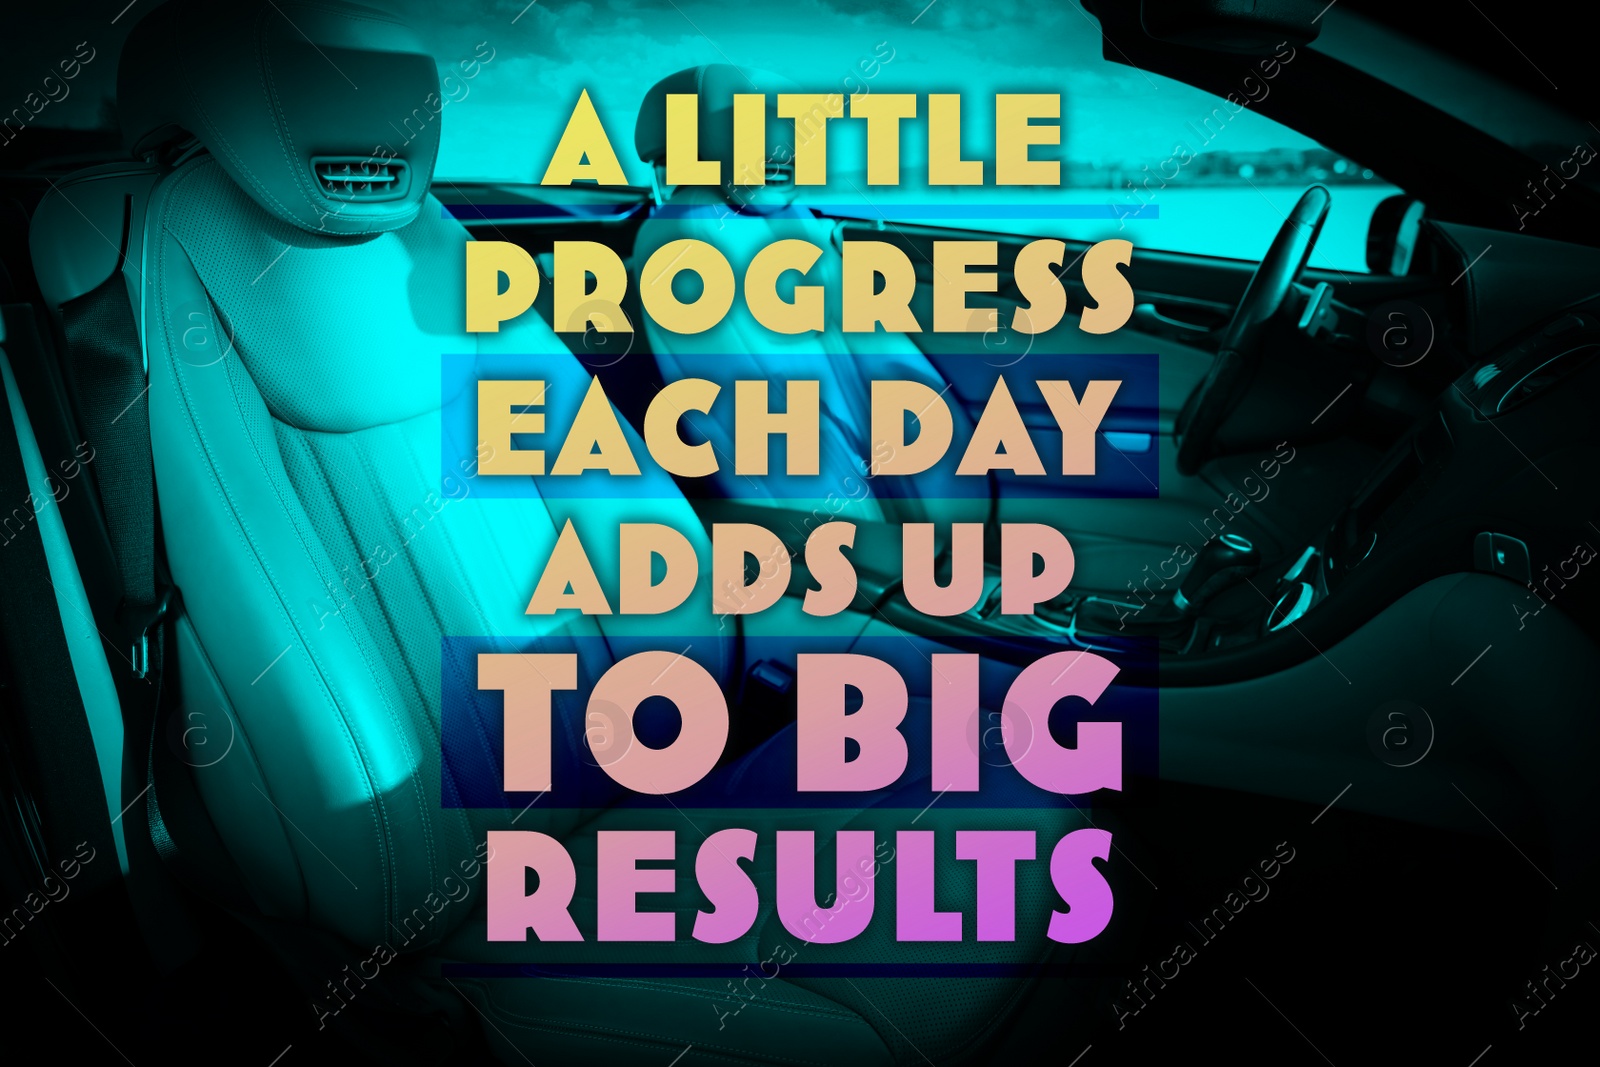 Image of A Little Progress Each Day Adds Up To Big Results. Inspirational quote motivating to make small positive actions daily towards weighty effect. Text against luxury car interior